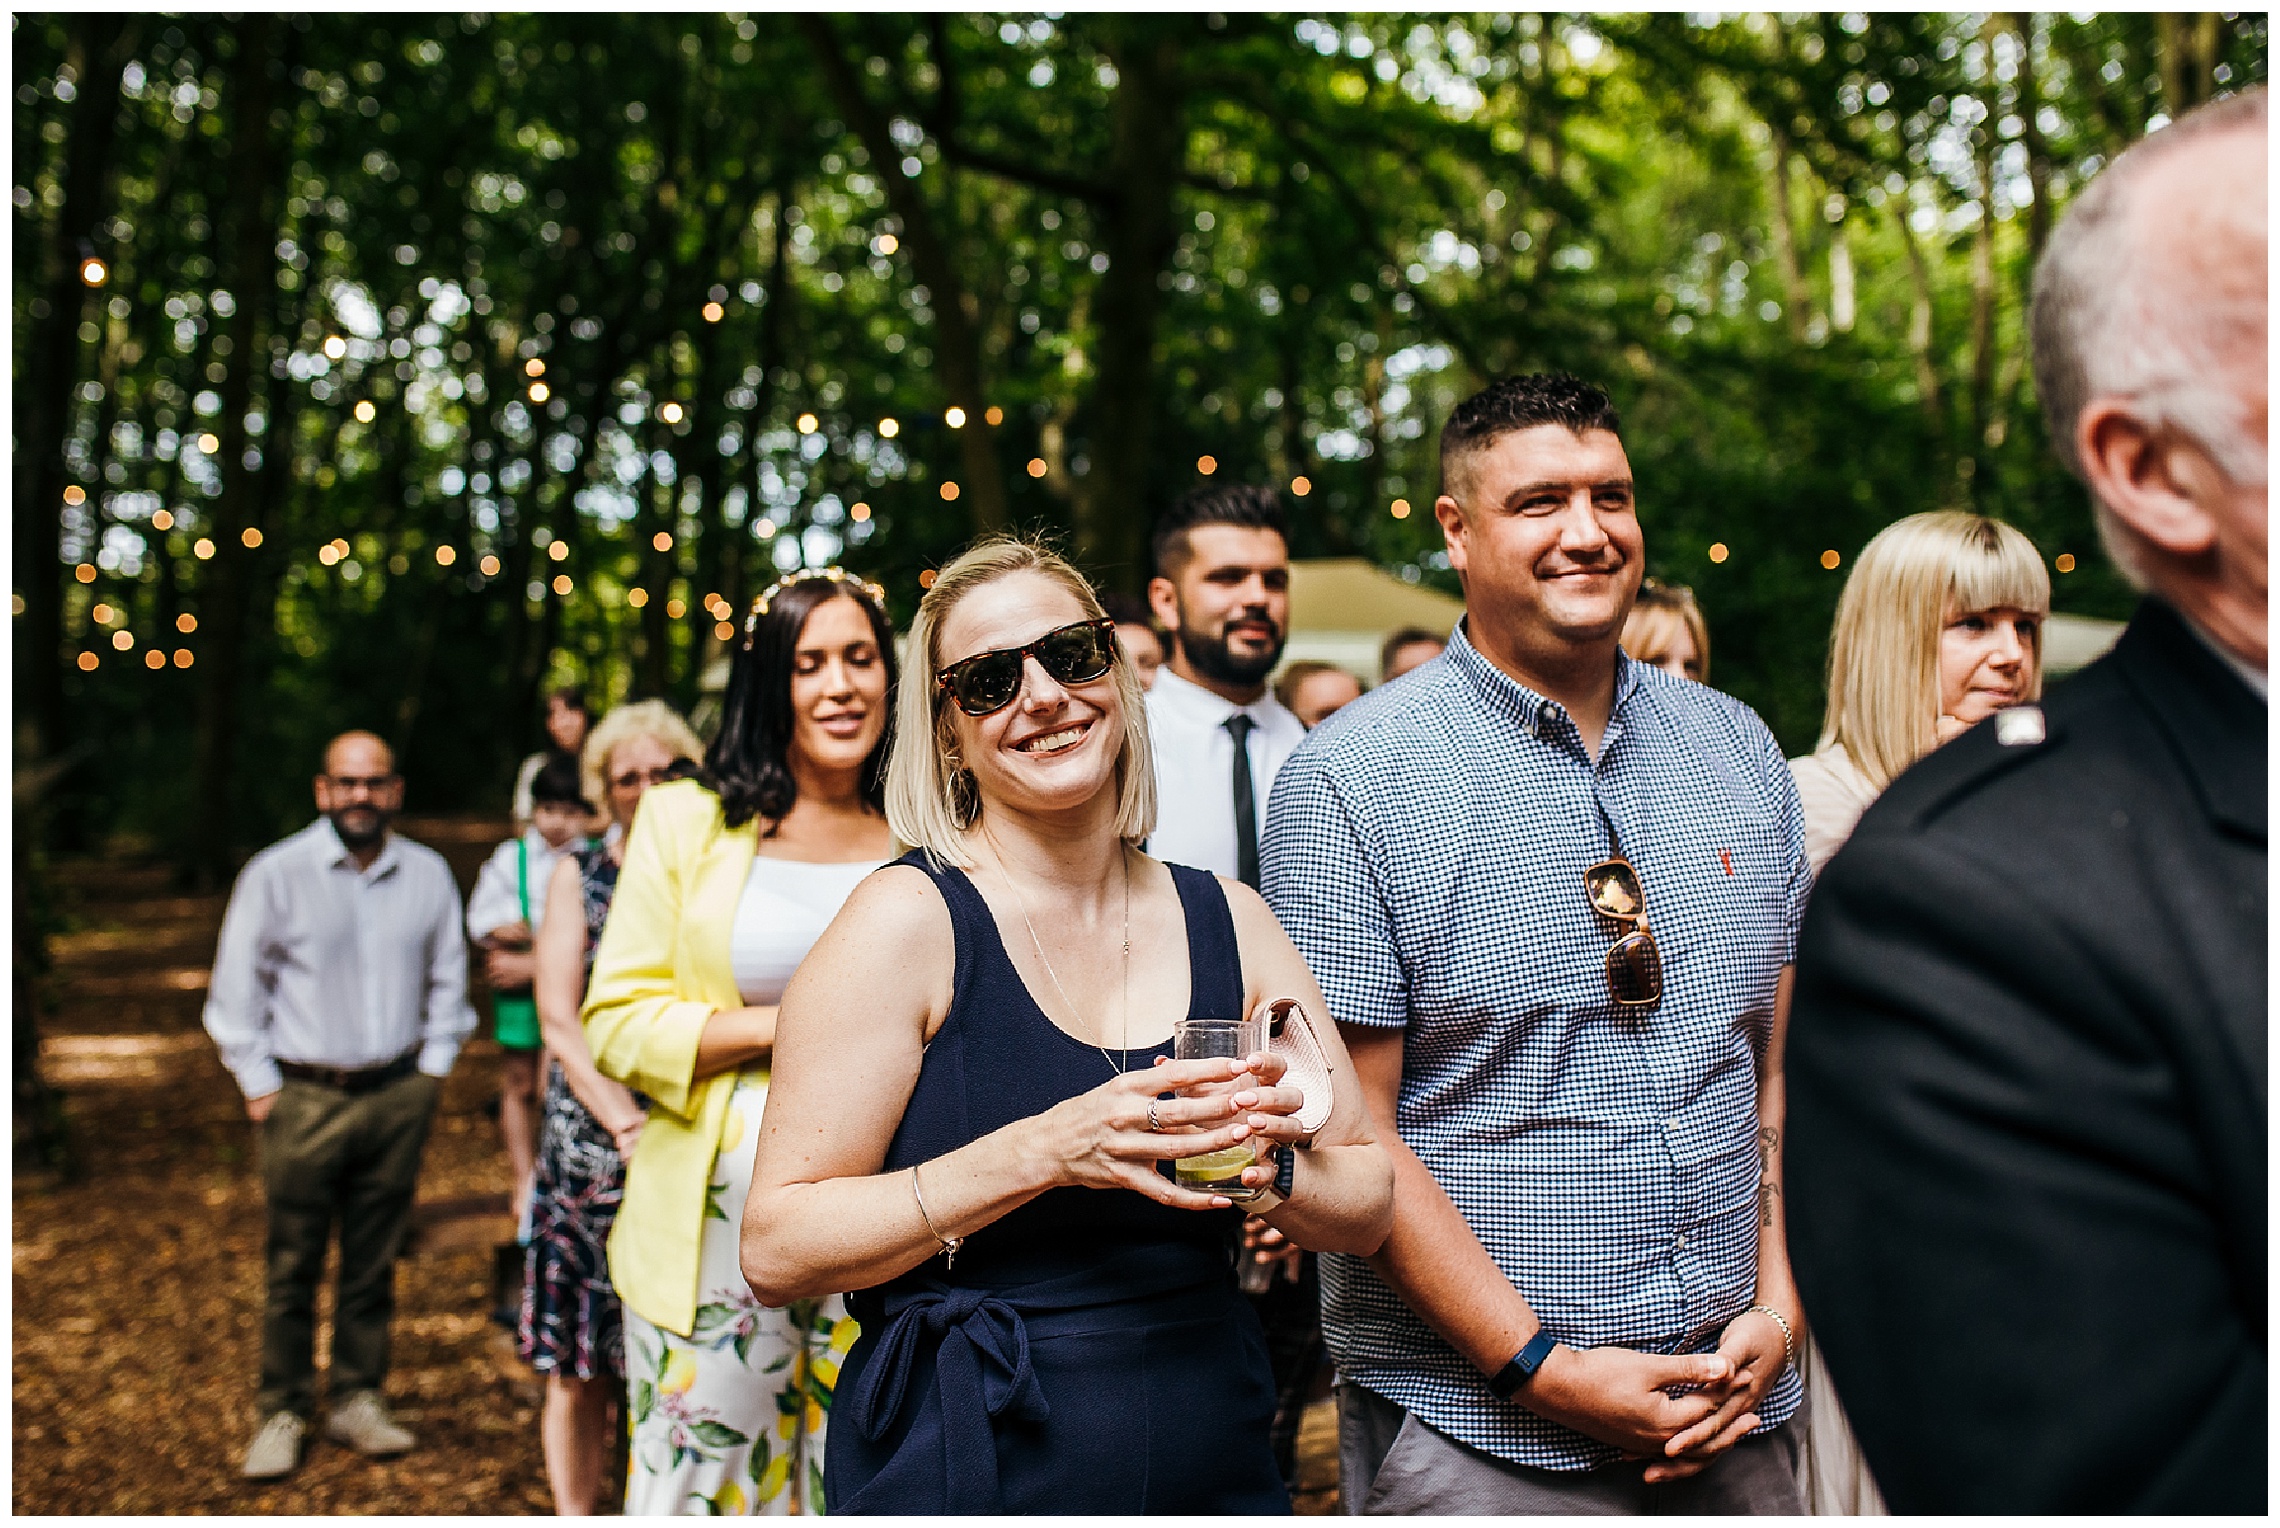 wedding guests smiling in sunglasses